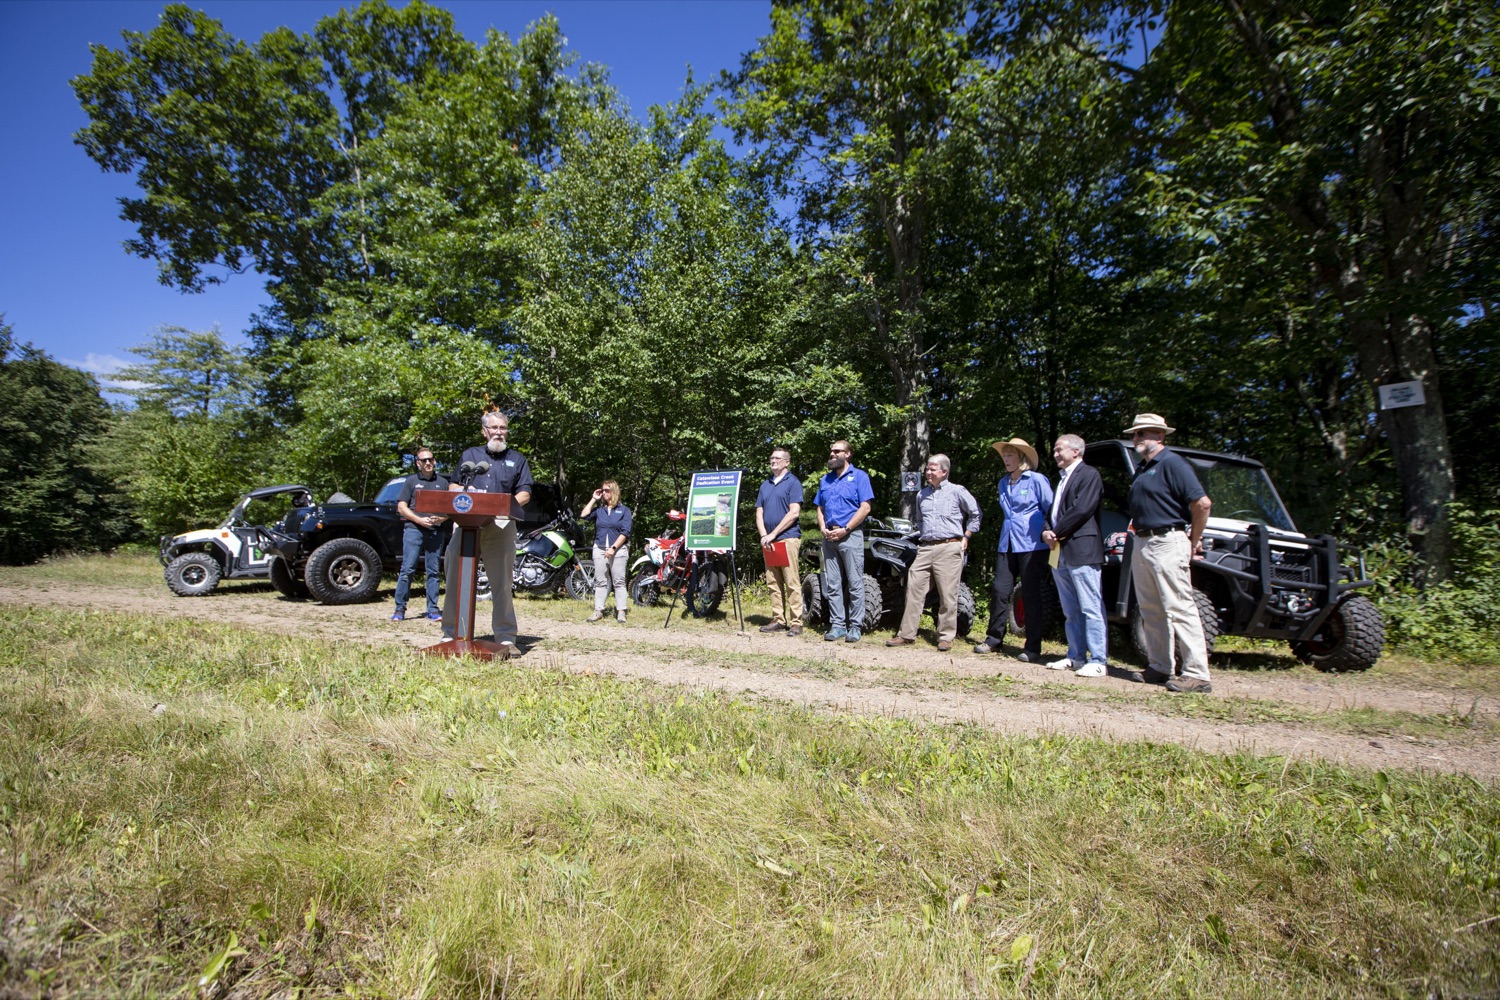 DCNR Deputy Secretary John Norbeck discusses the acquisition of a 5,600-acre tract of land that will be developed into a new motorized recreation area, in McAdoo, PA on August 12, 2022.<br><a href="https://filesource.amperwave.net/commonwealthofpa/photo/22090_dcnr_RecreationArea_11.jpg" target="_blank">⇣ Download Photo</a>